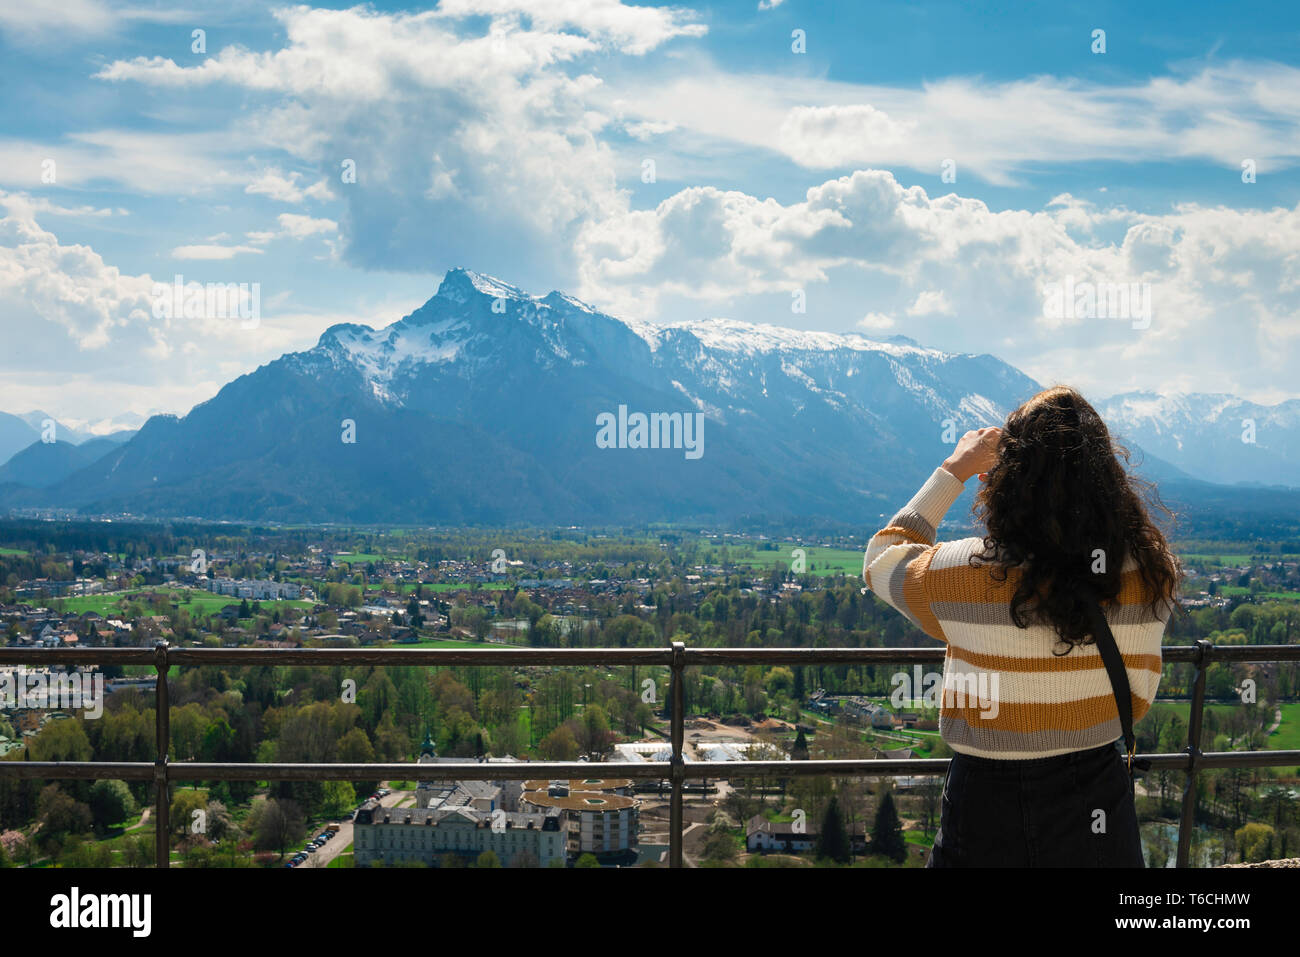 Young woman travel, rear view of a young woman taking a photo of a lansdcape scene with alpine mountains in Salzburg, Austria. Stock Photo